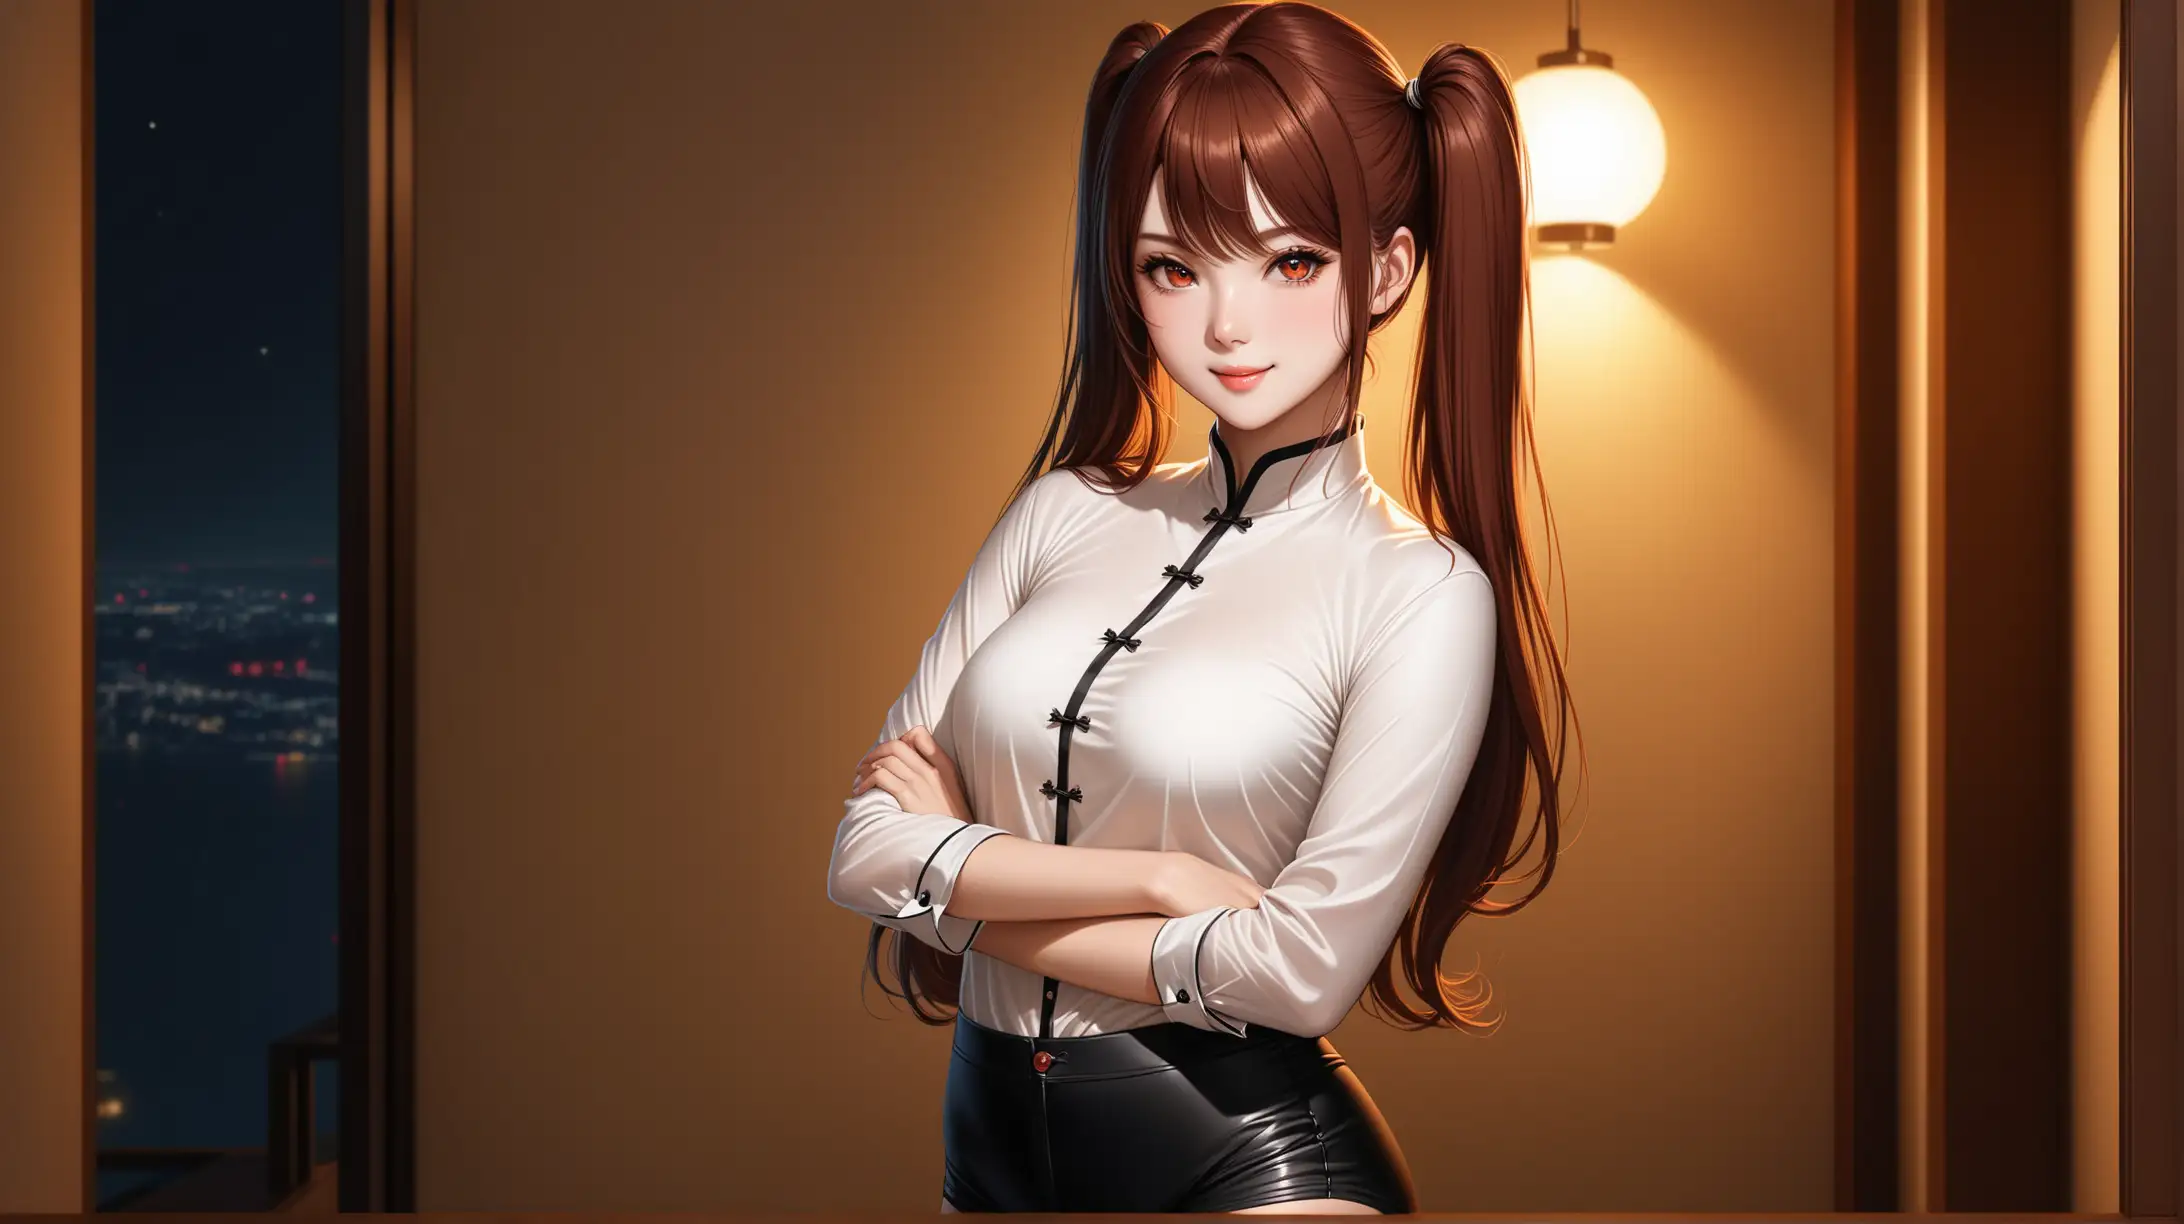 Draw a woman, extremely long reddish-brown hair, two high parted twintails, side locks, side-swept bangs, scarlet eyes, perky figure, high quality, realistic, accurate, detailed, long shot, night lighting, indoors, seductive pose, black shorts, mandarin collar shirt, smiling at the viewer